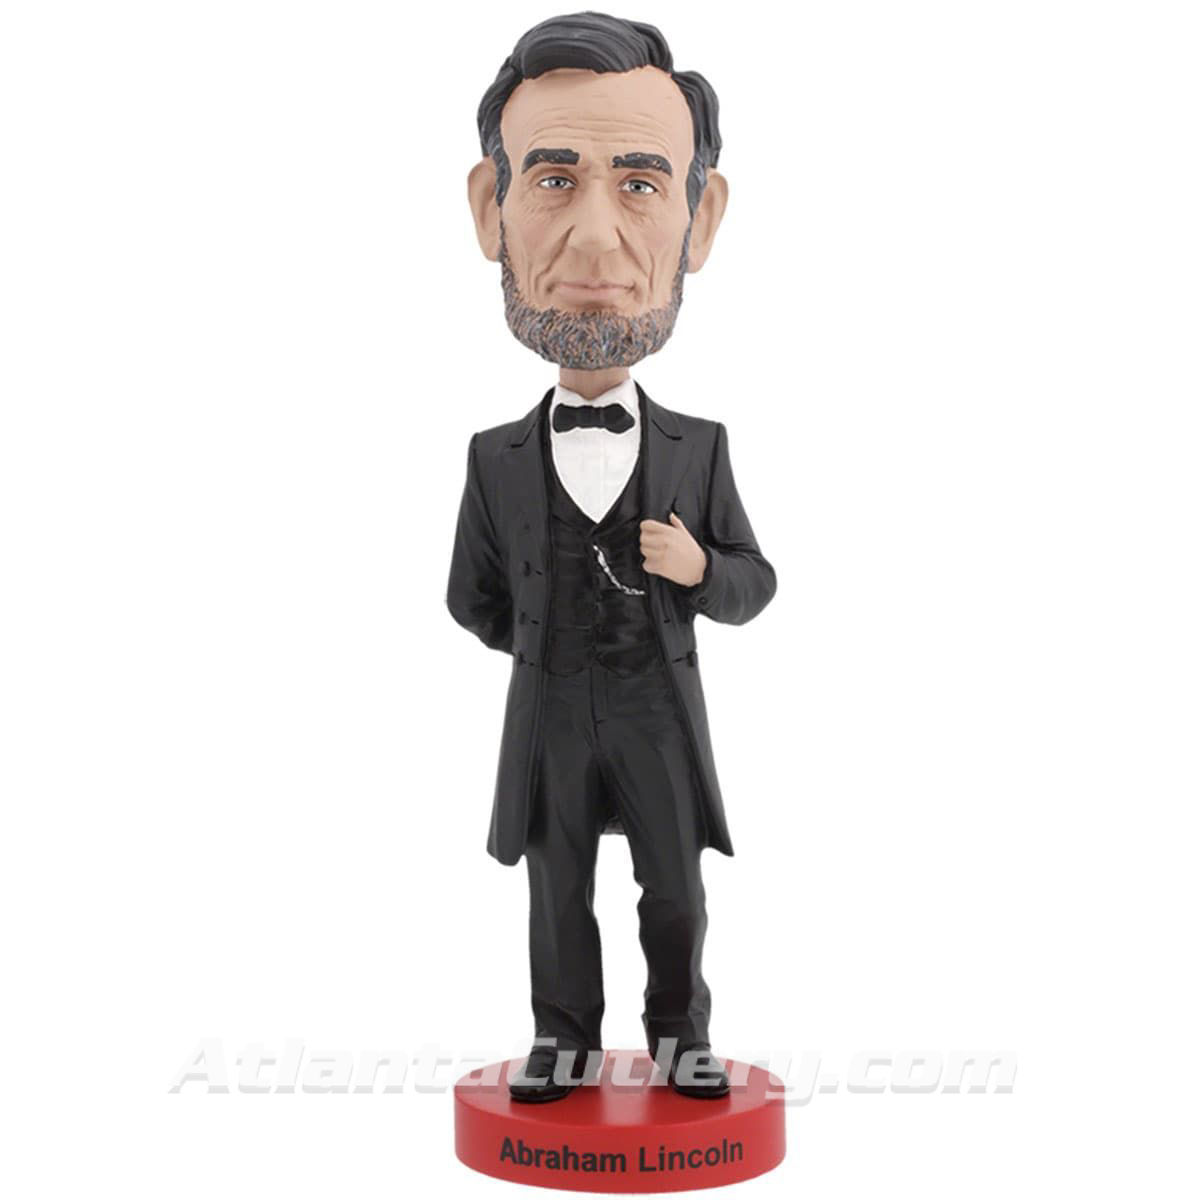 Abraham Lincoln hand-painted resin bobblehead includes box with important facts about the 16th President of the United States